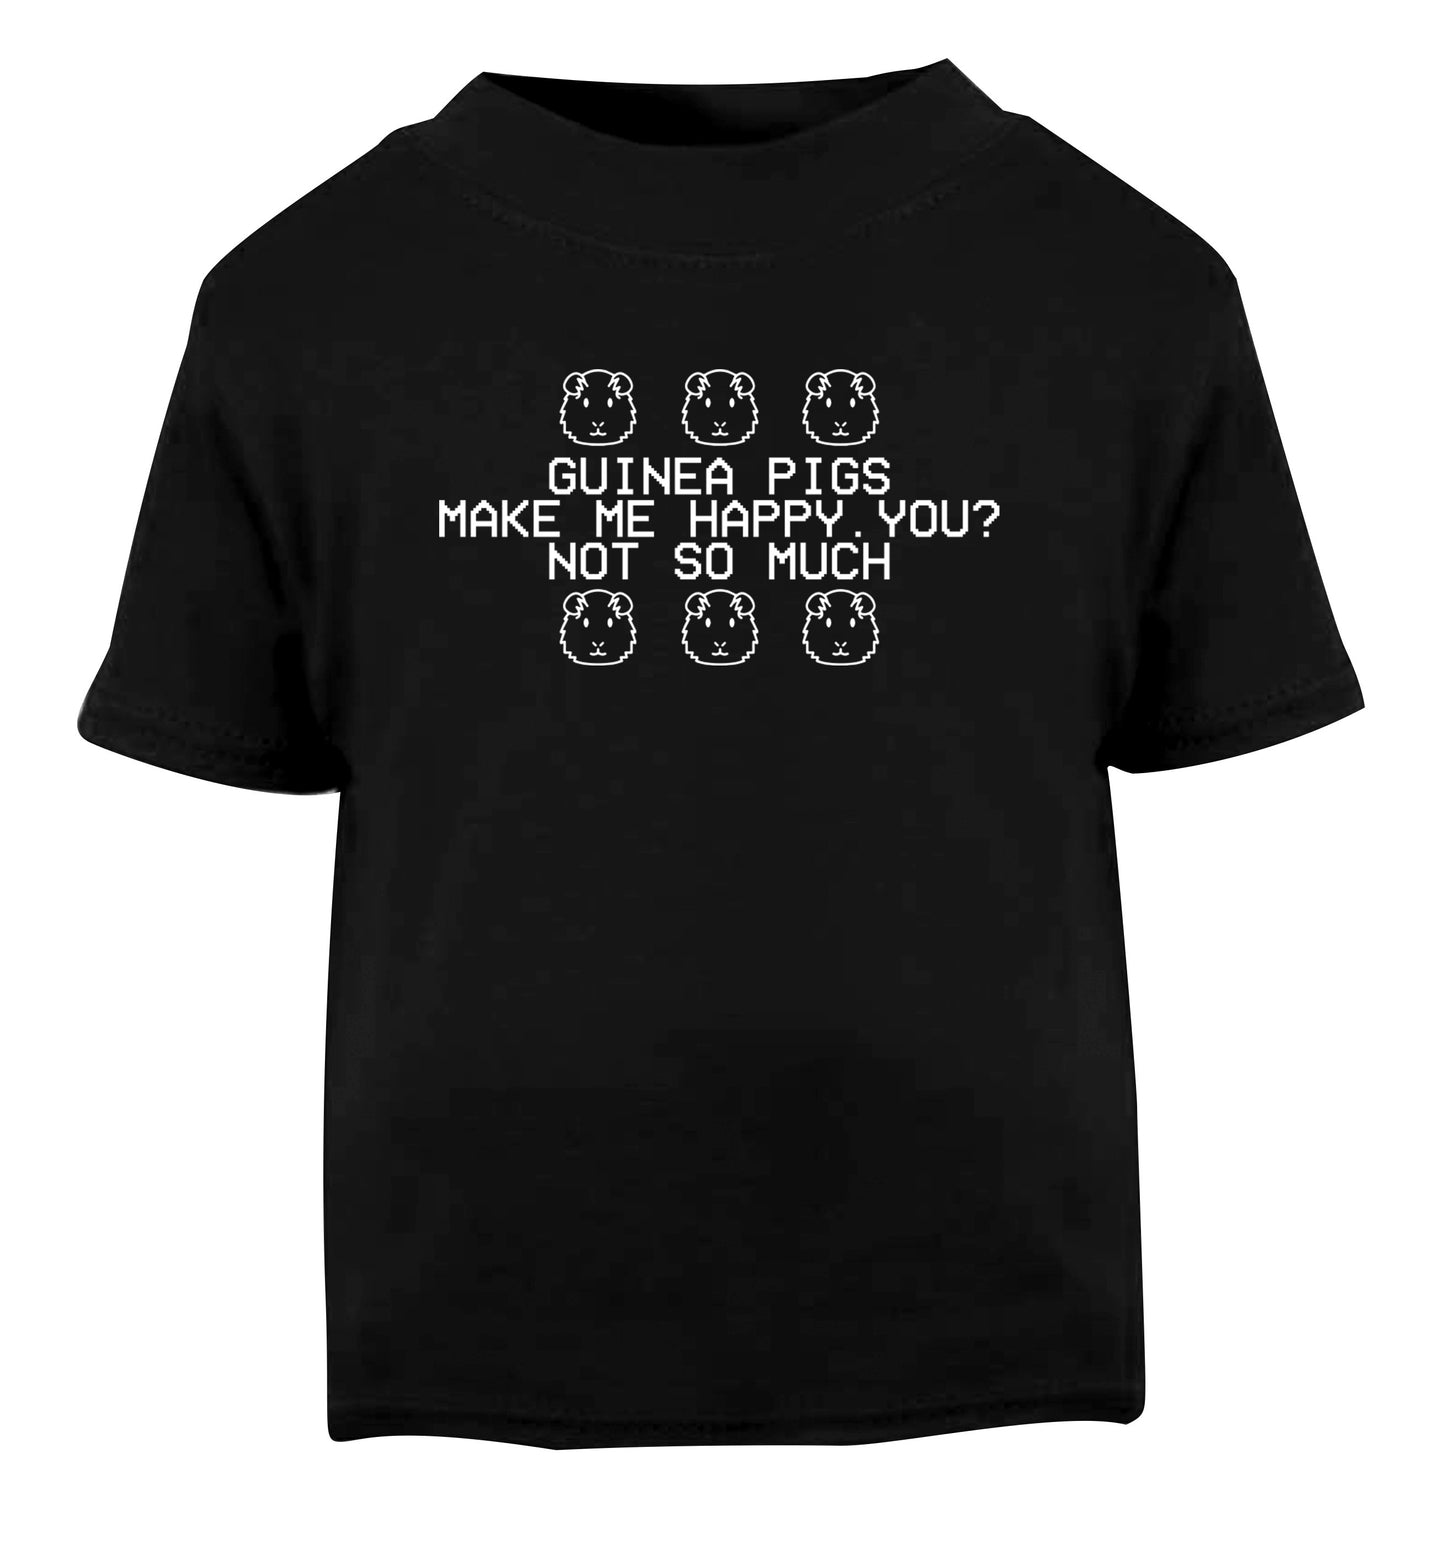 Guinea pigs make me happy, you not so much Black Baby Toddler Tshirt 2 years